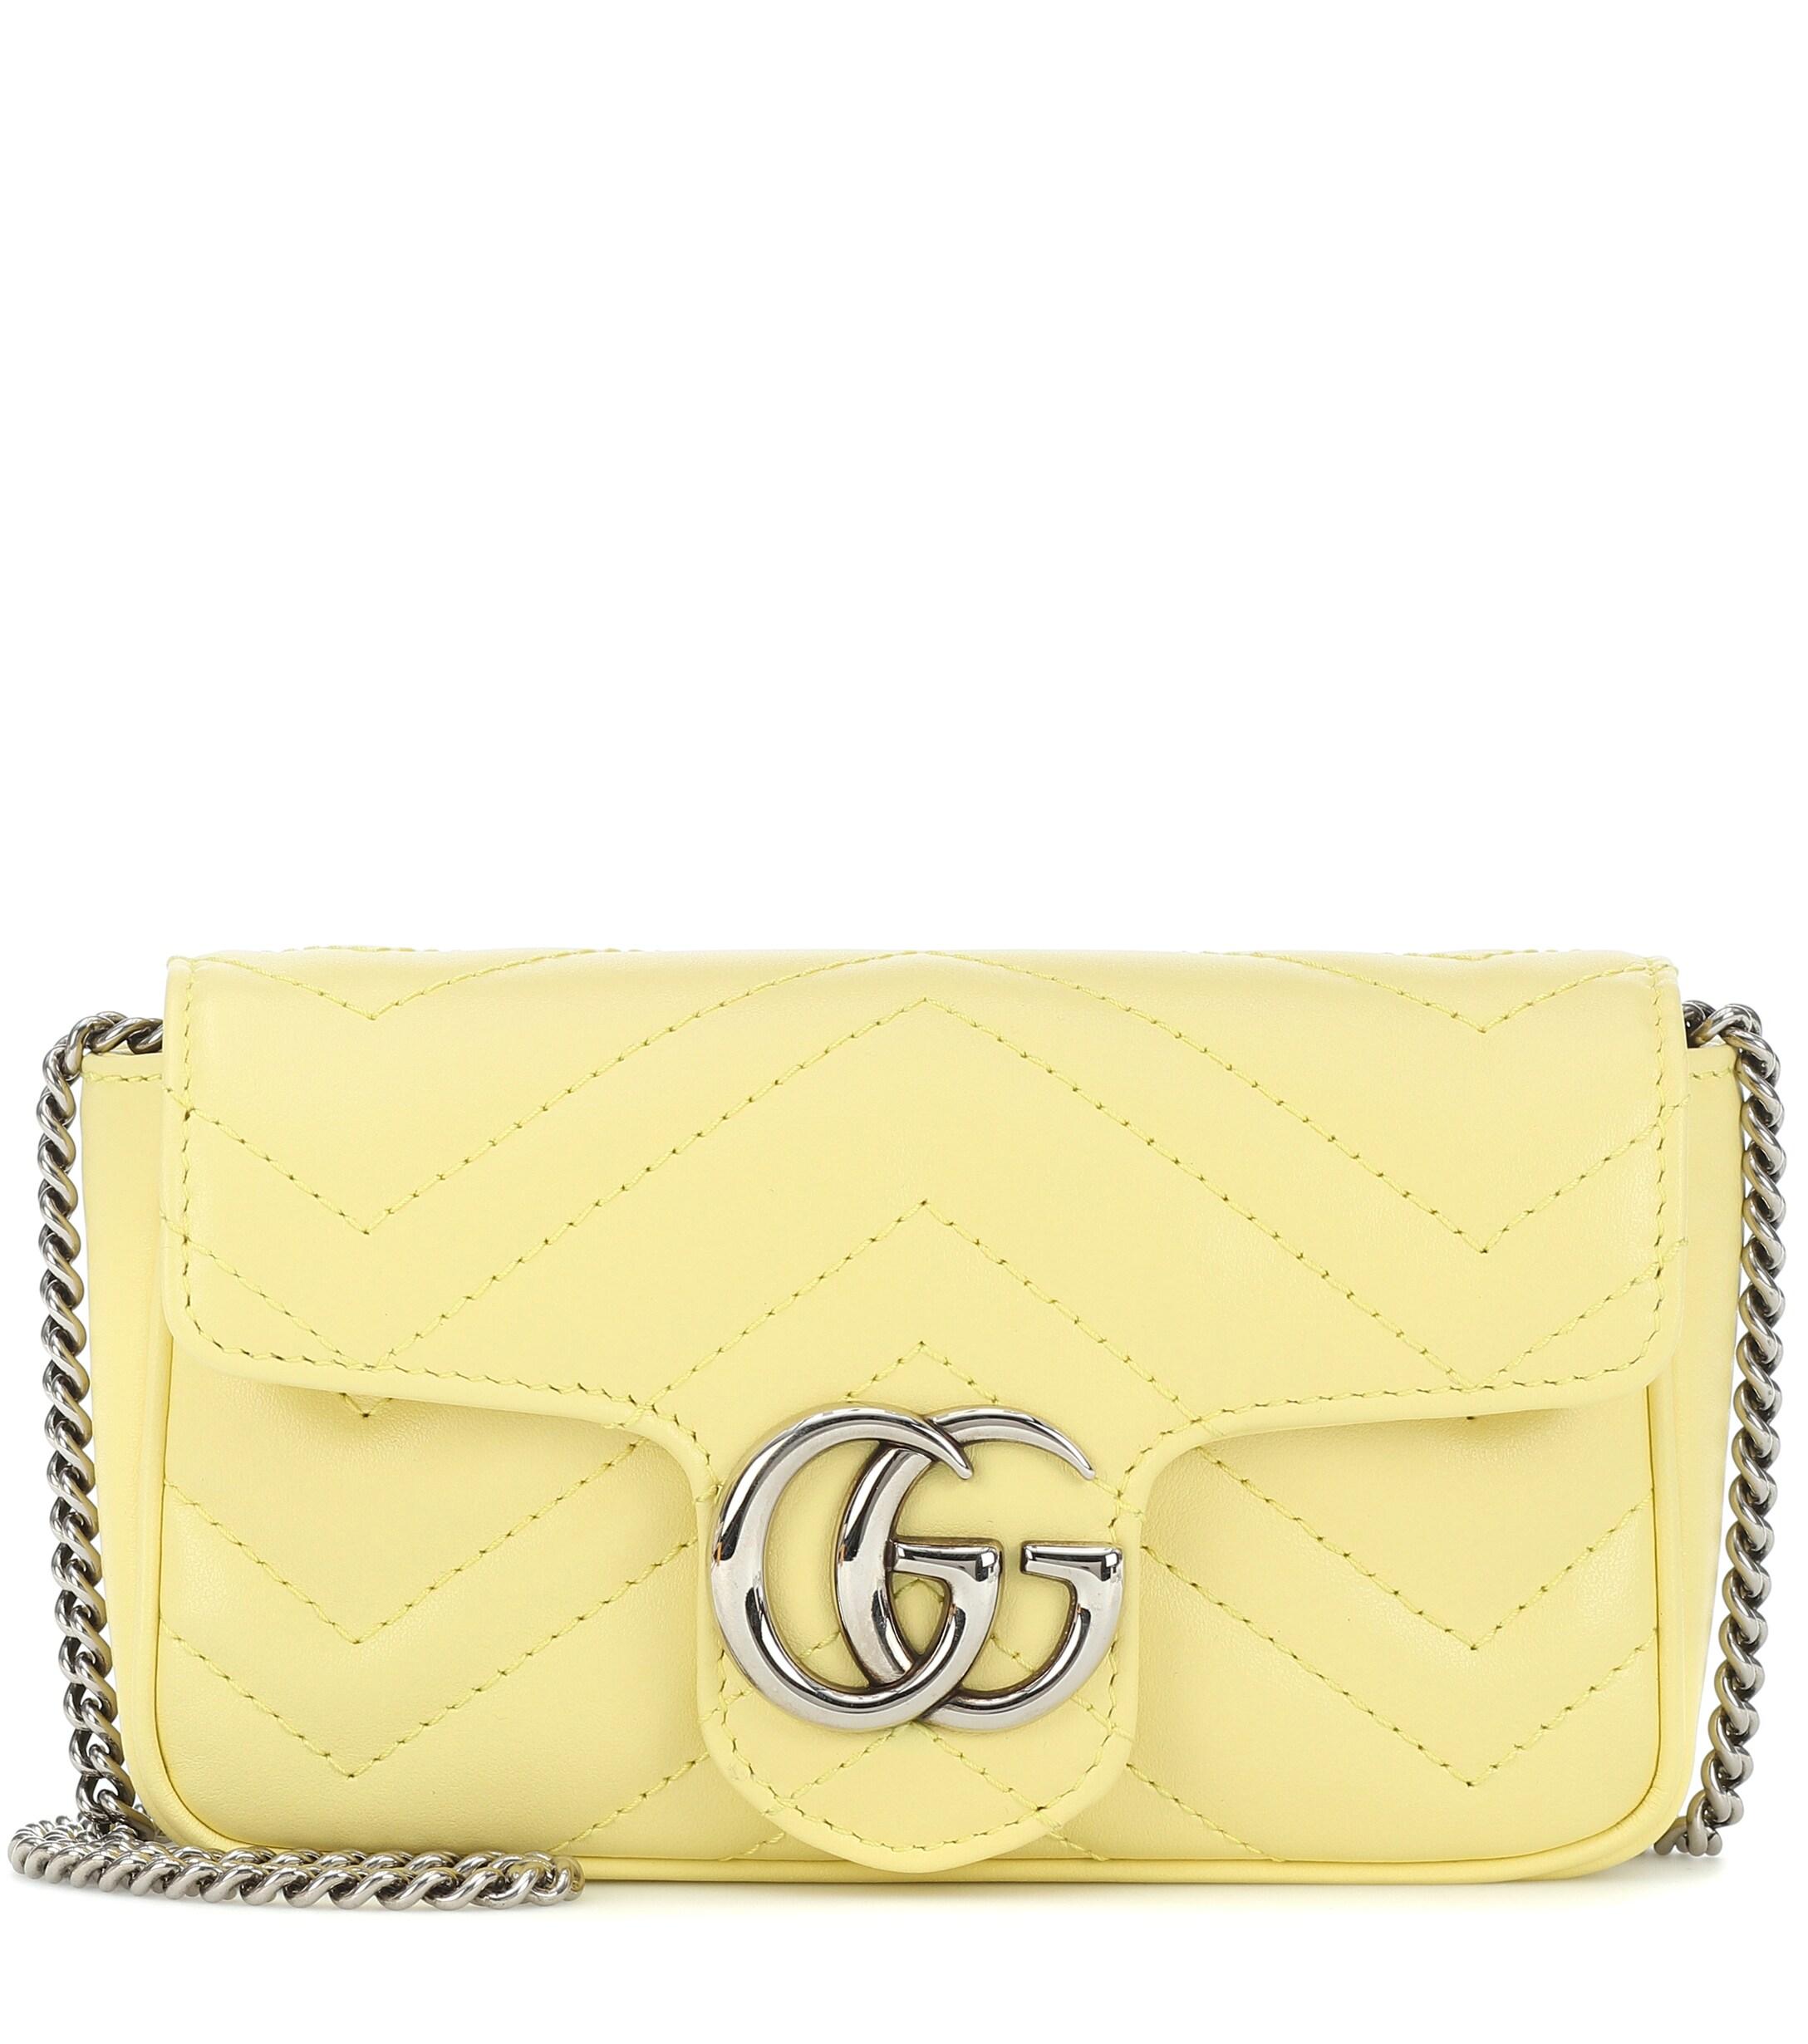 Gucci GG Marmont Super Mini Leather Shoulder Bag in Yellow - Lyst